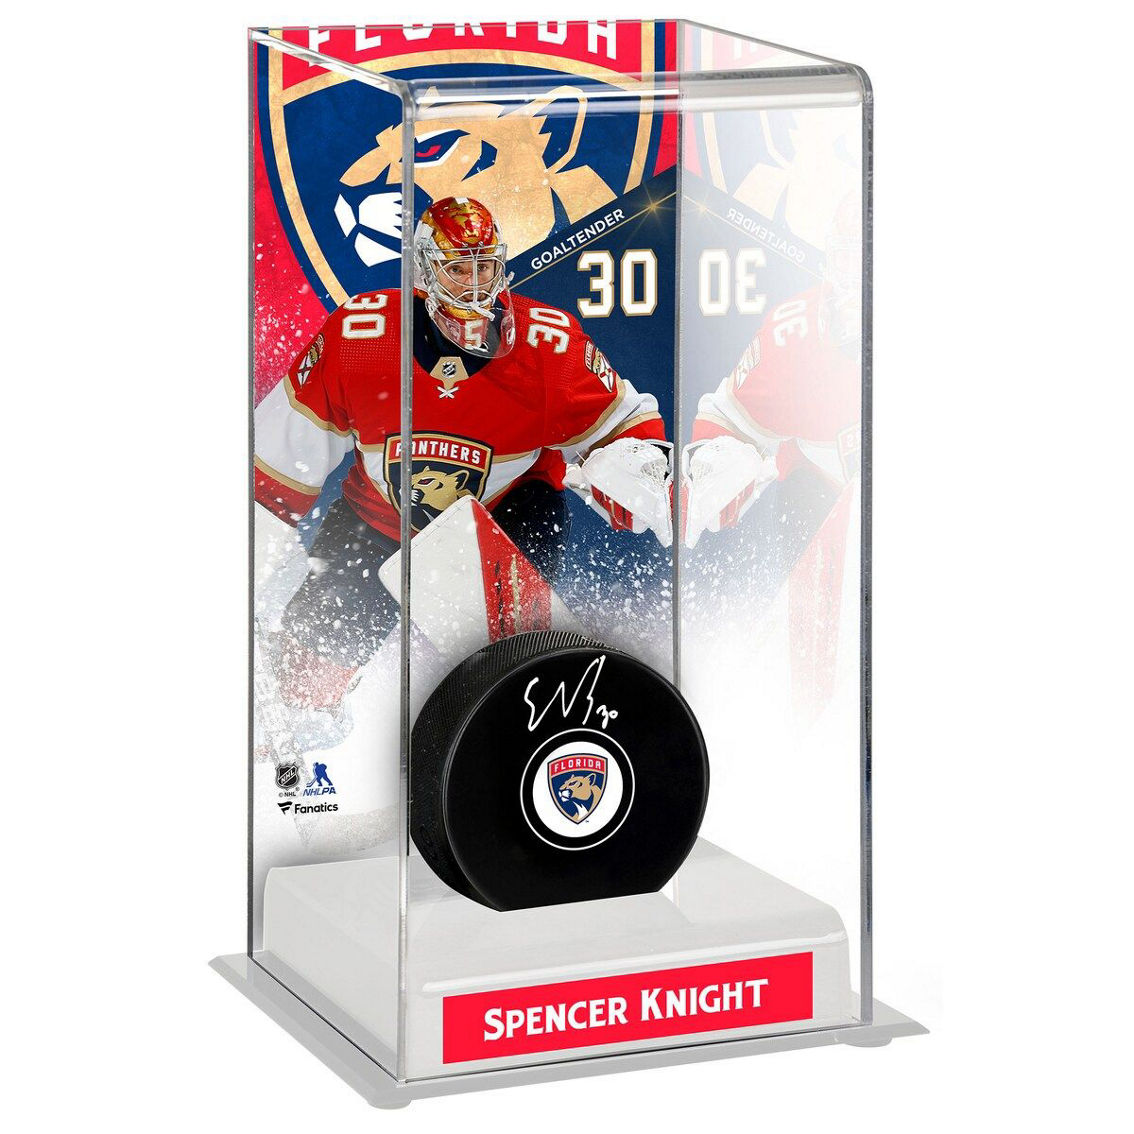 Fanatics Authentic Spencer Knight Florida Panthers Autographed Puck with Deluxe Tall Hockey Puck Case - Image 2 of 2